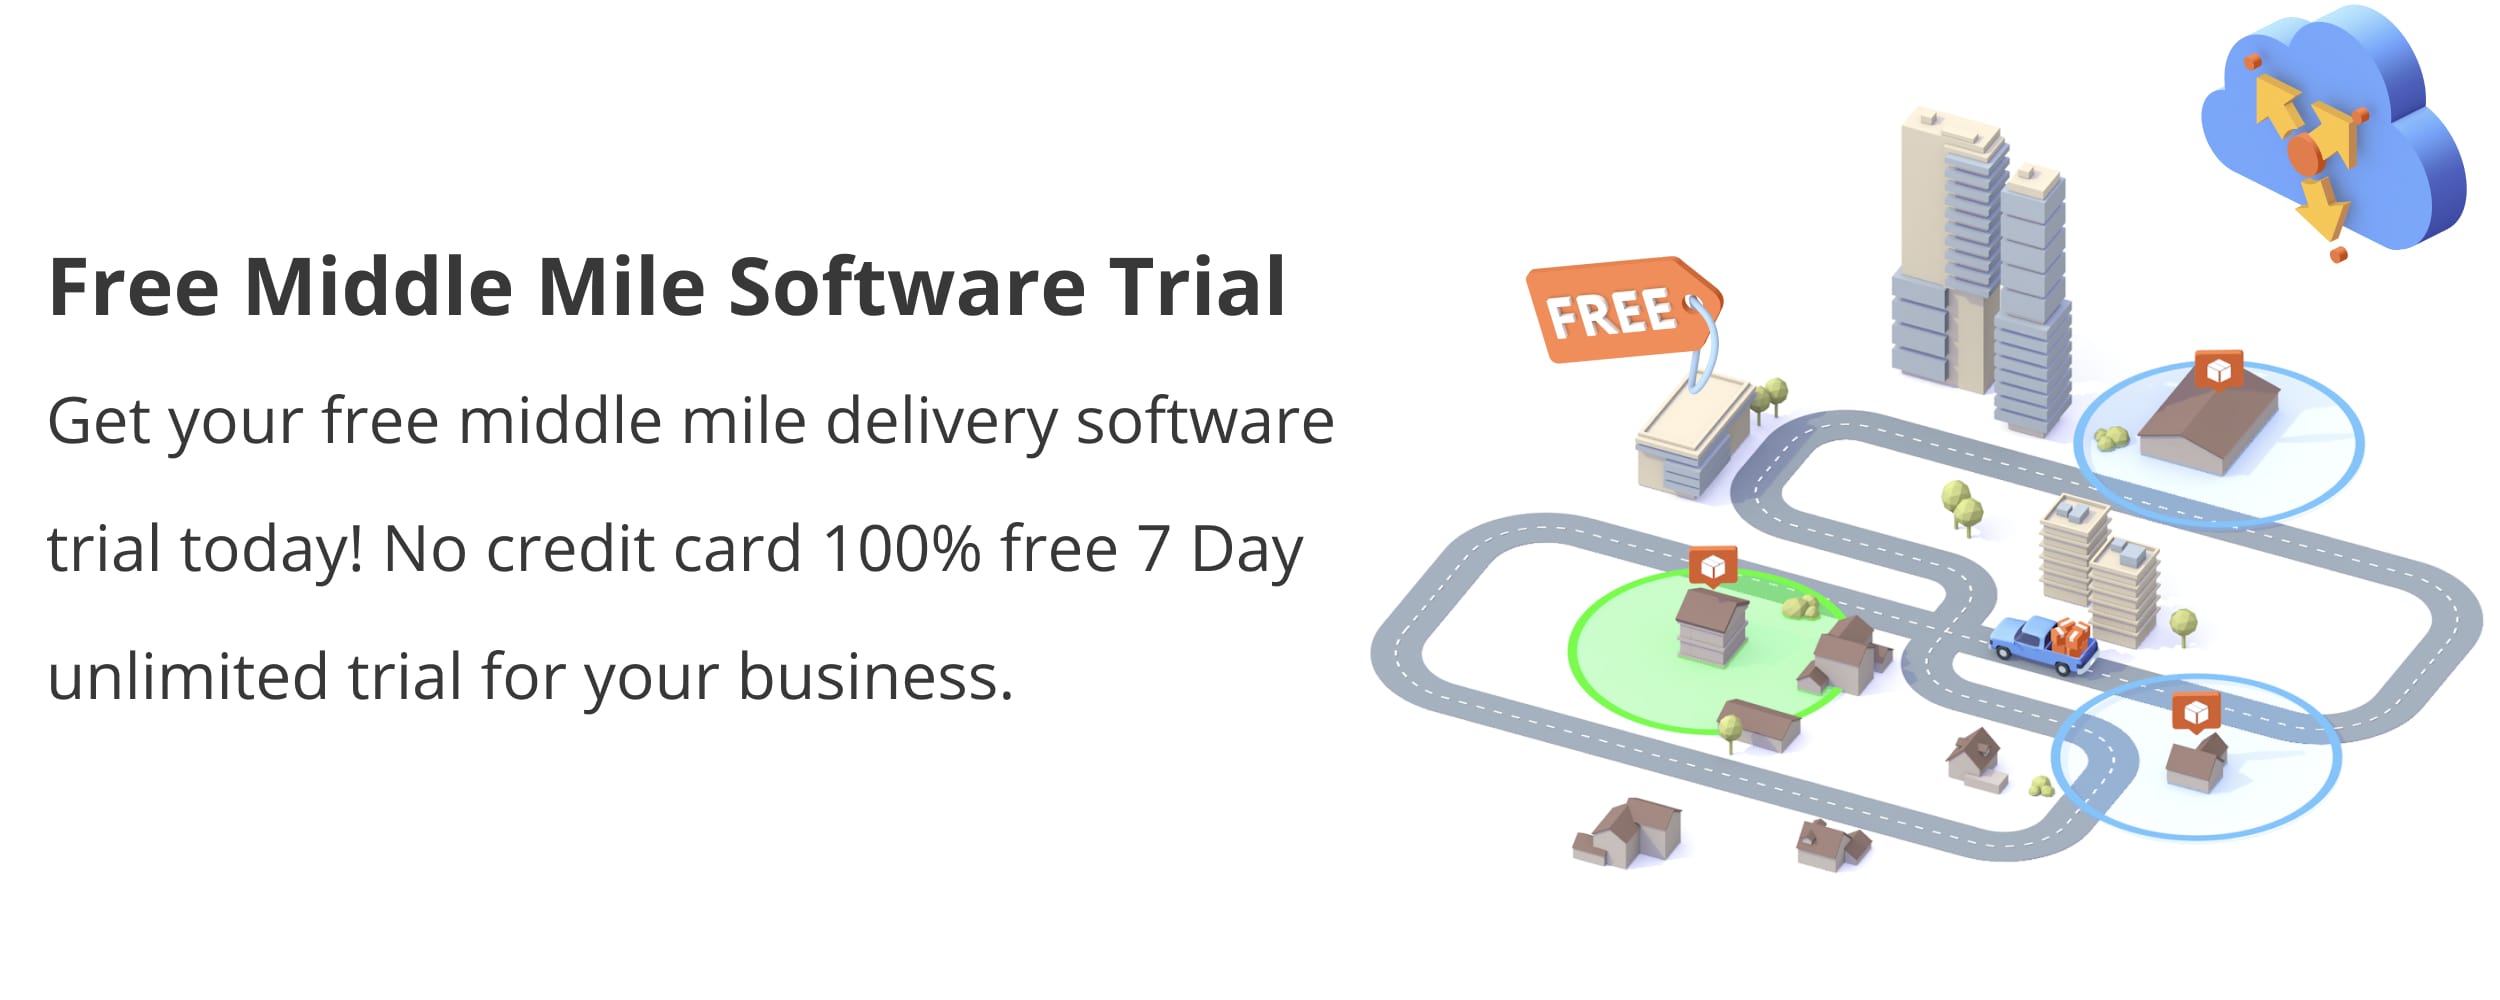 Free middle mile delivery software trial for 7 days without credit card.